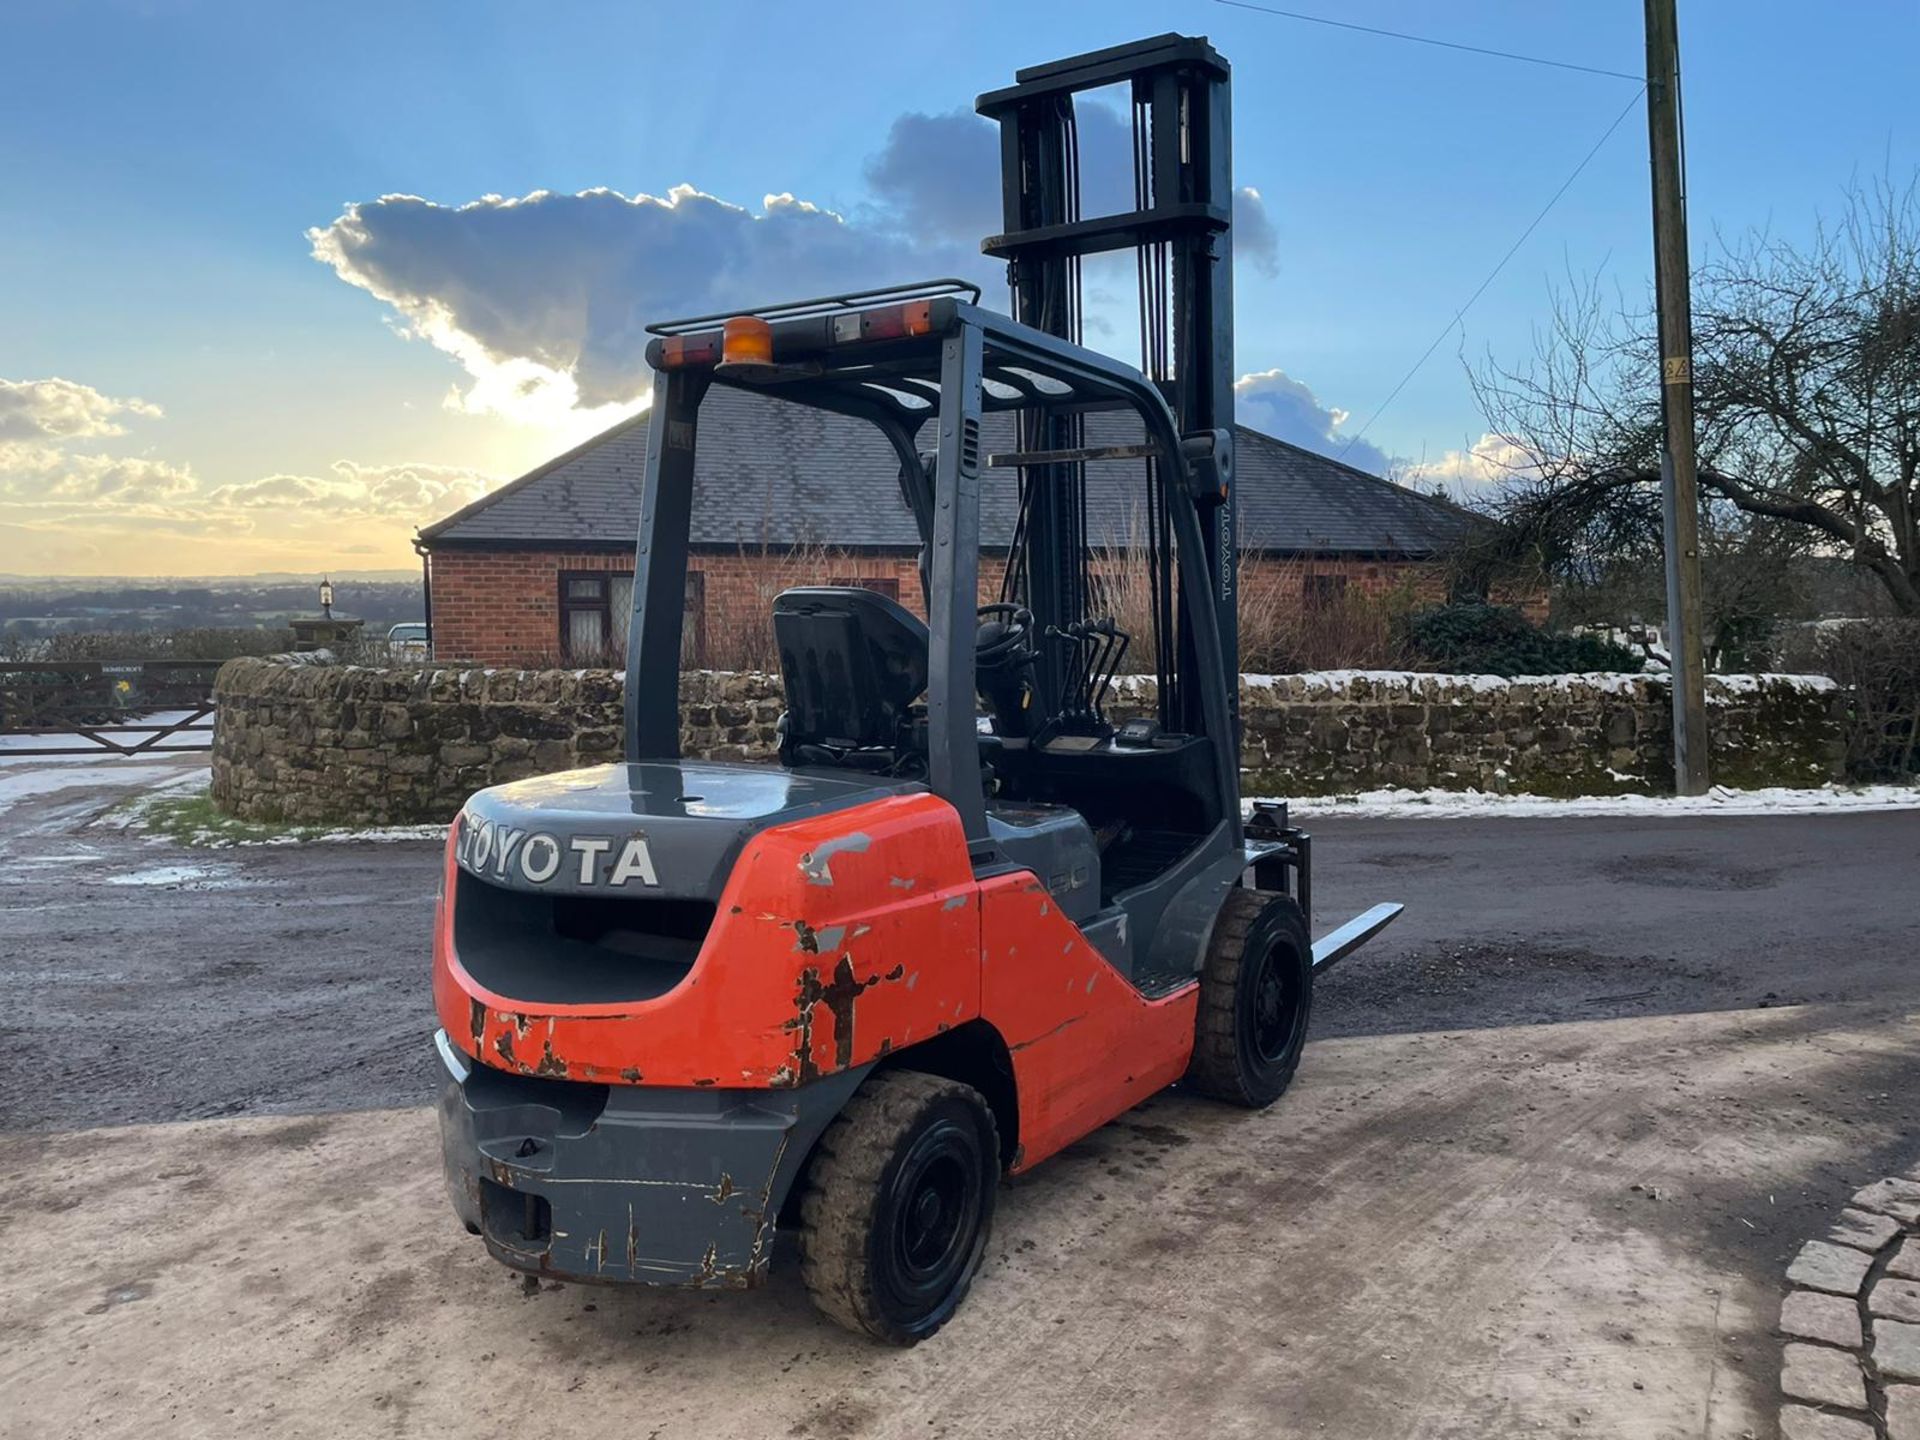 2013 TOYOTA TONERO 30 FORKLIFT, RUNS, DRIVES AND LIFTS, LOW 4720 HOURS, CLEAN MACHINE *PLUS VAT* - Image 5 of 9